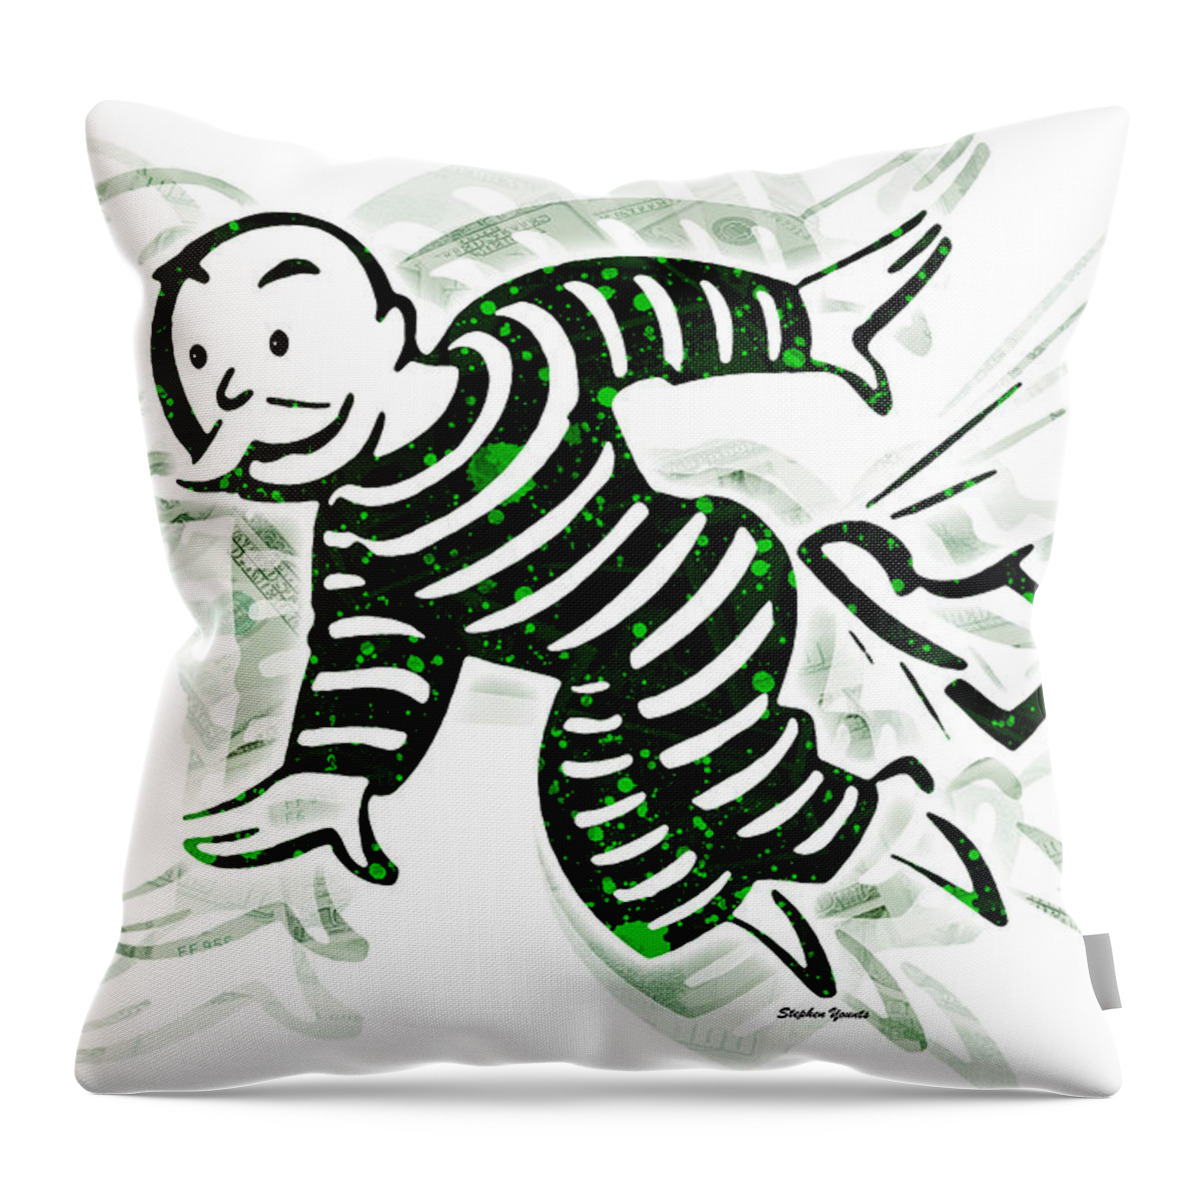 Monopoly Throw Pillow featuring the digital art Monopoly Man - Out of Jail Free by Stephen Younts